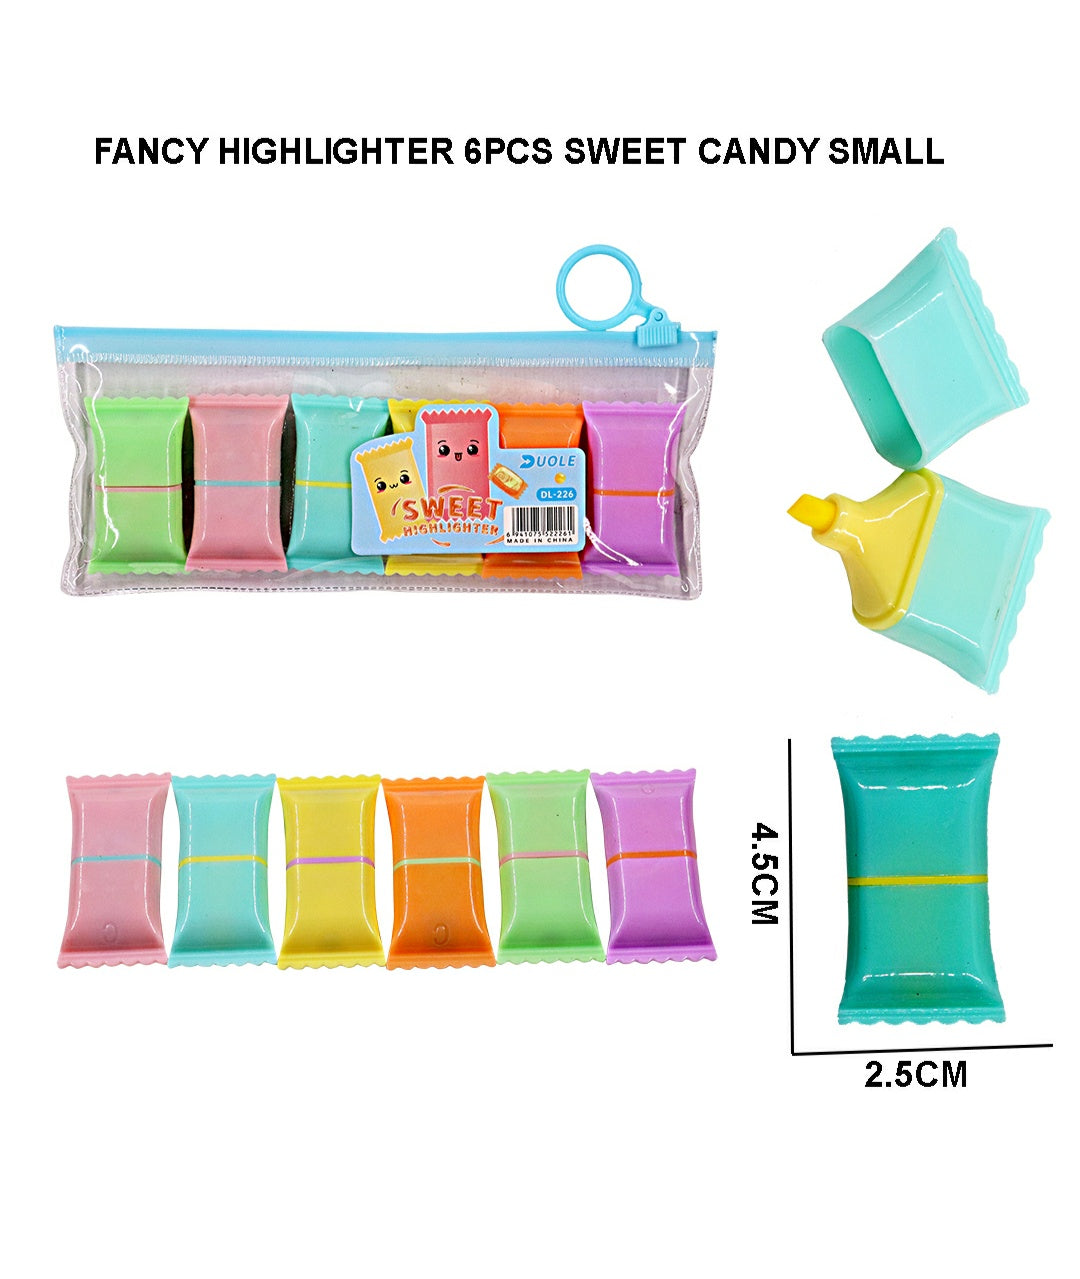 Fancy Highlighter 6Pcs Sweet Candy Small Dl-226 | INKARTO